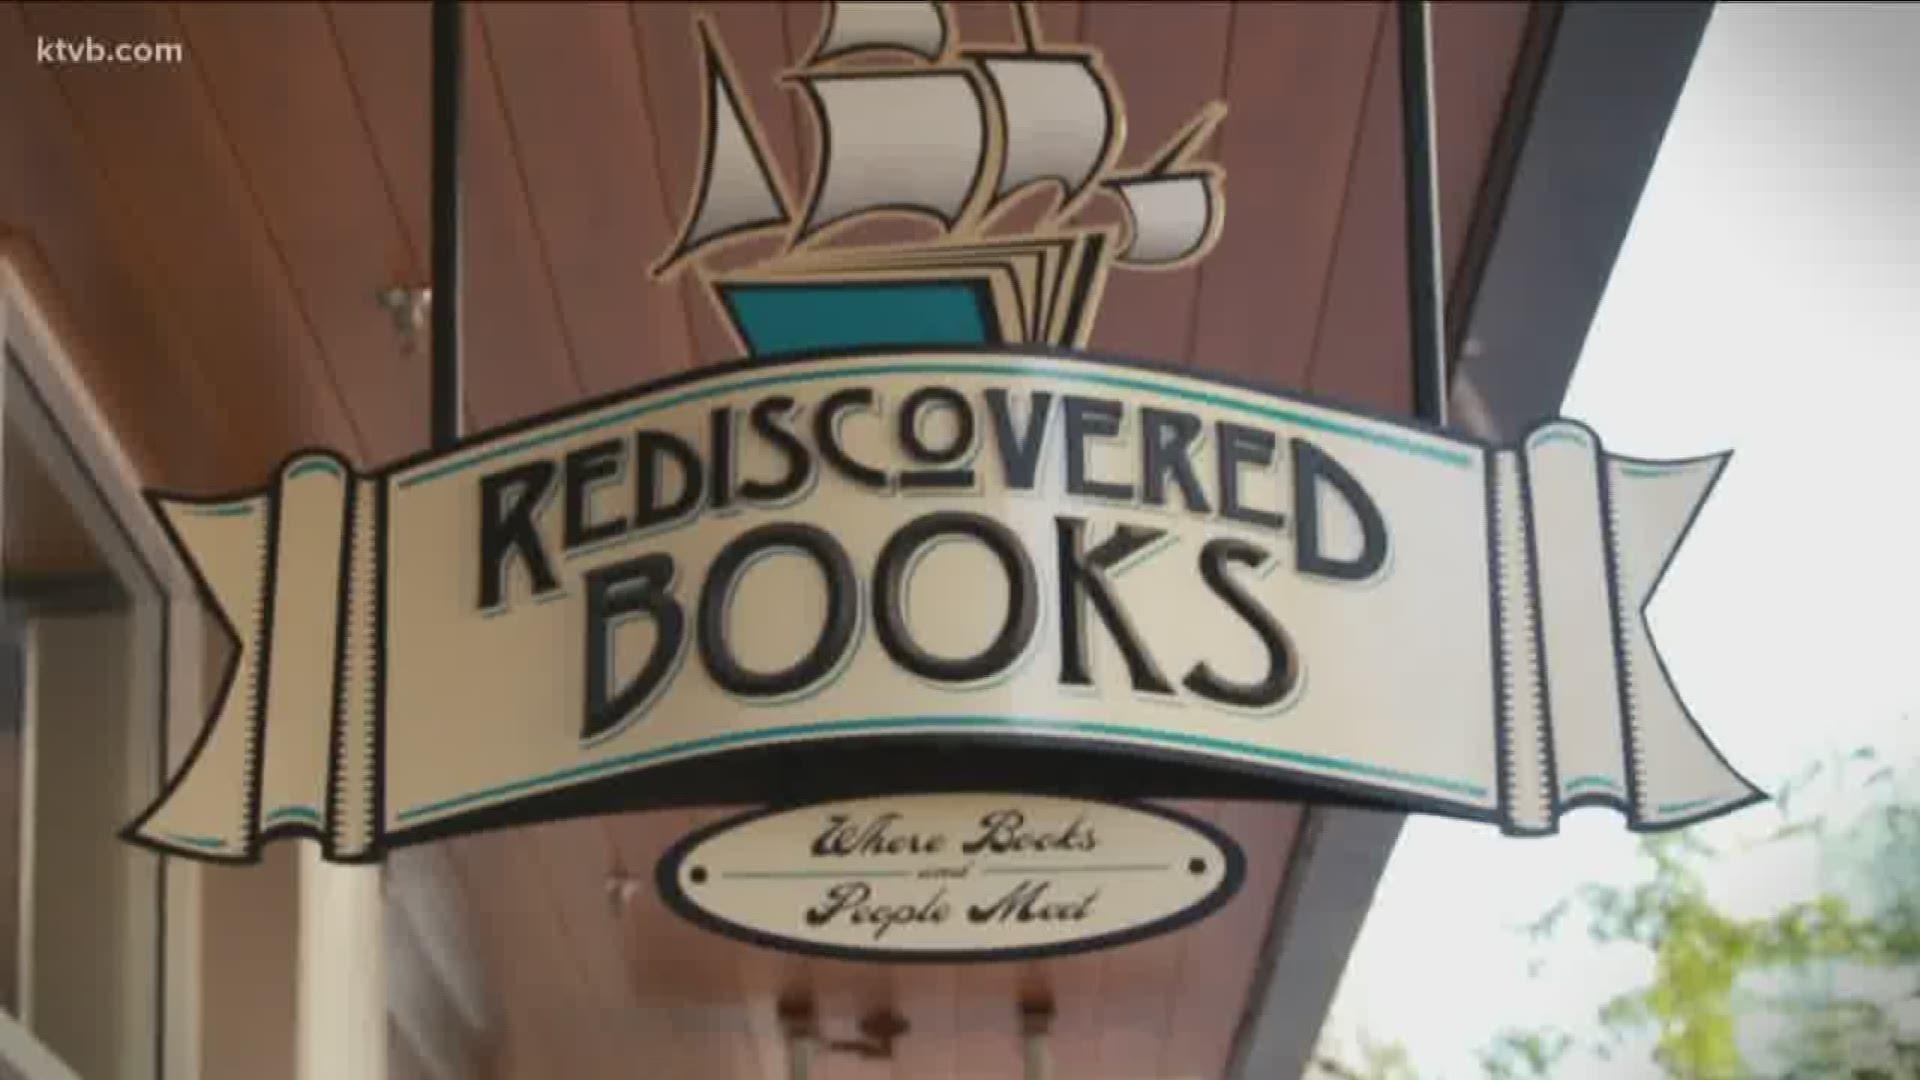 Mellisa Paul introduces us to the co-owner of Rediscovered Books who shows us what makes her store so special.